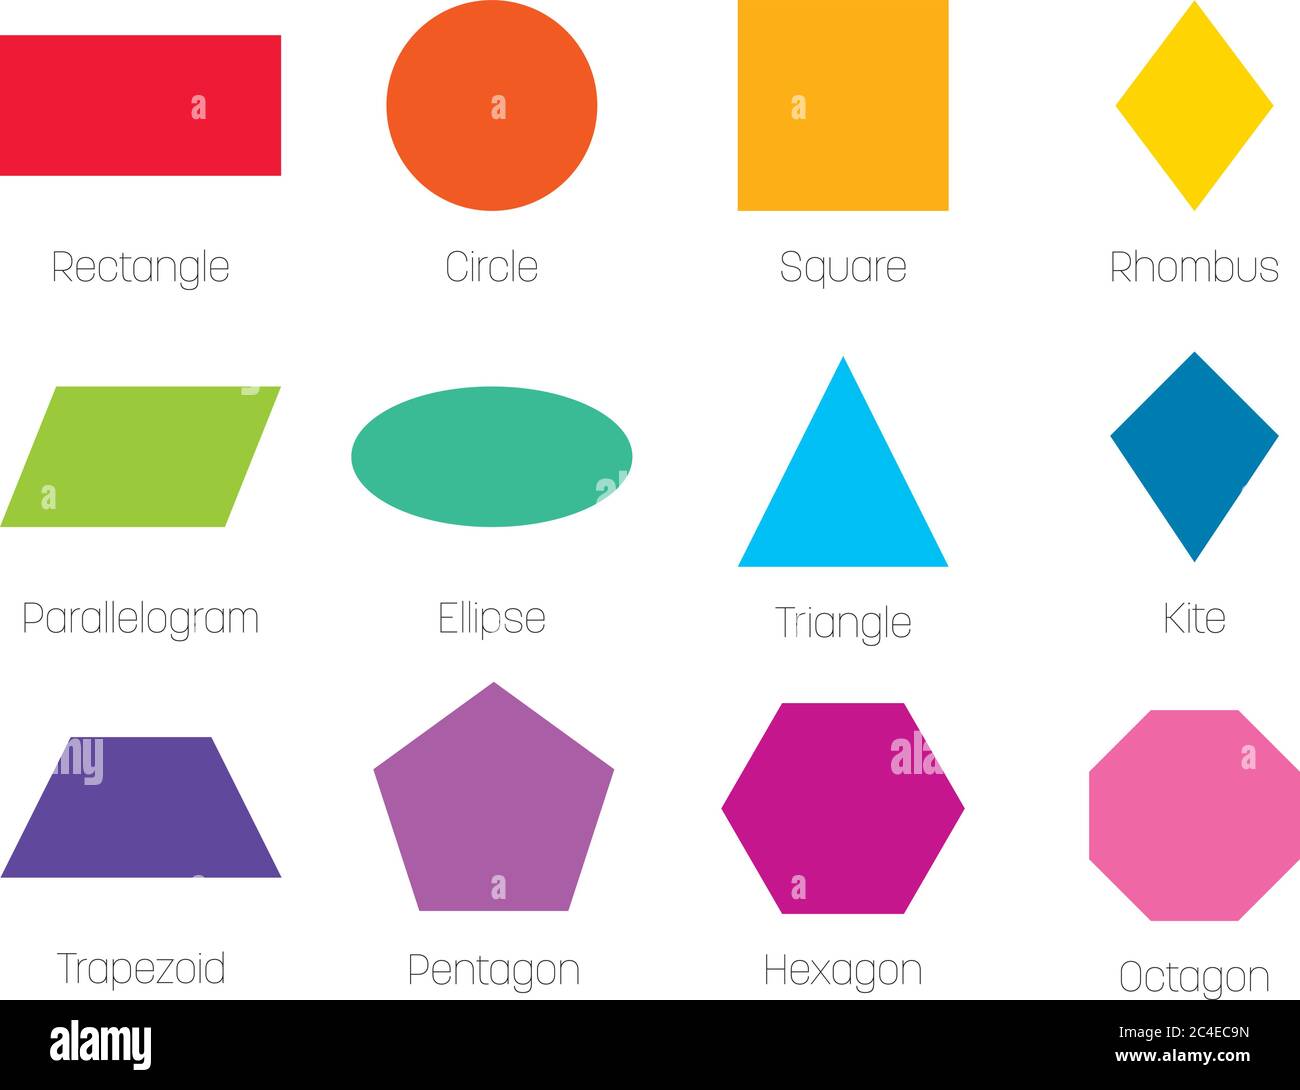 Geometric shapes with labels. Set of 12 basic shapes. Simple flat vector illustration. Stock Vector